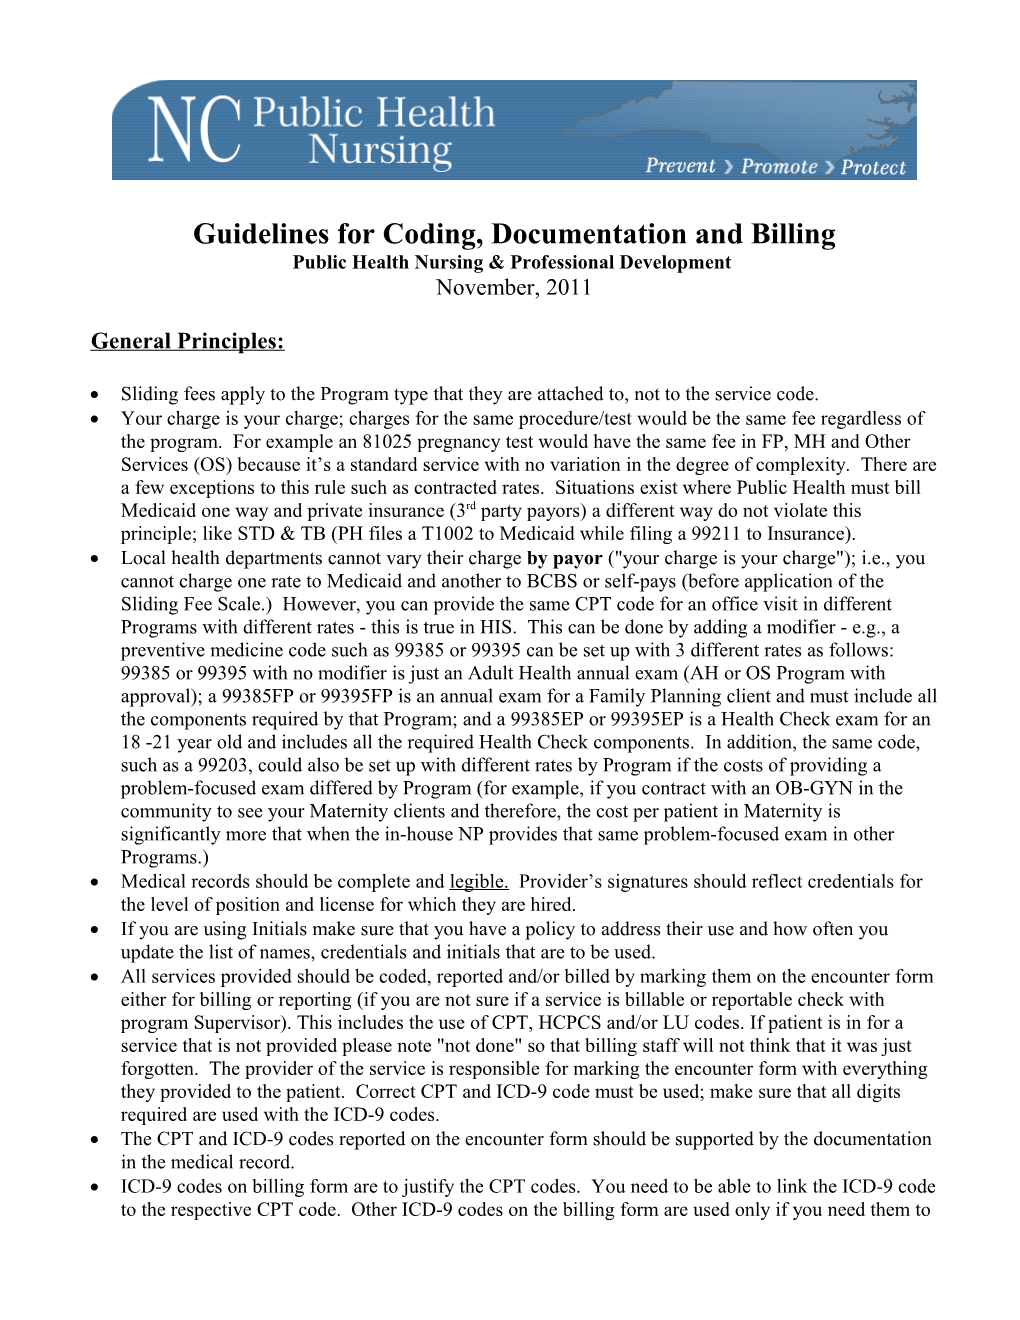 Guidelines for Coding, Documentation and Billing